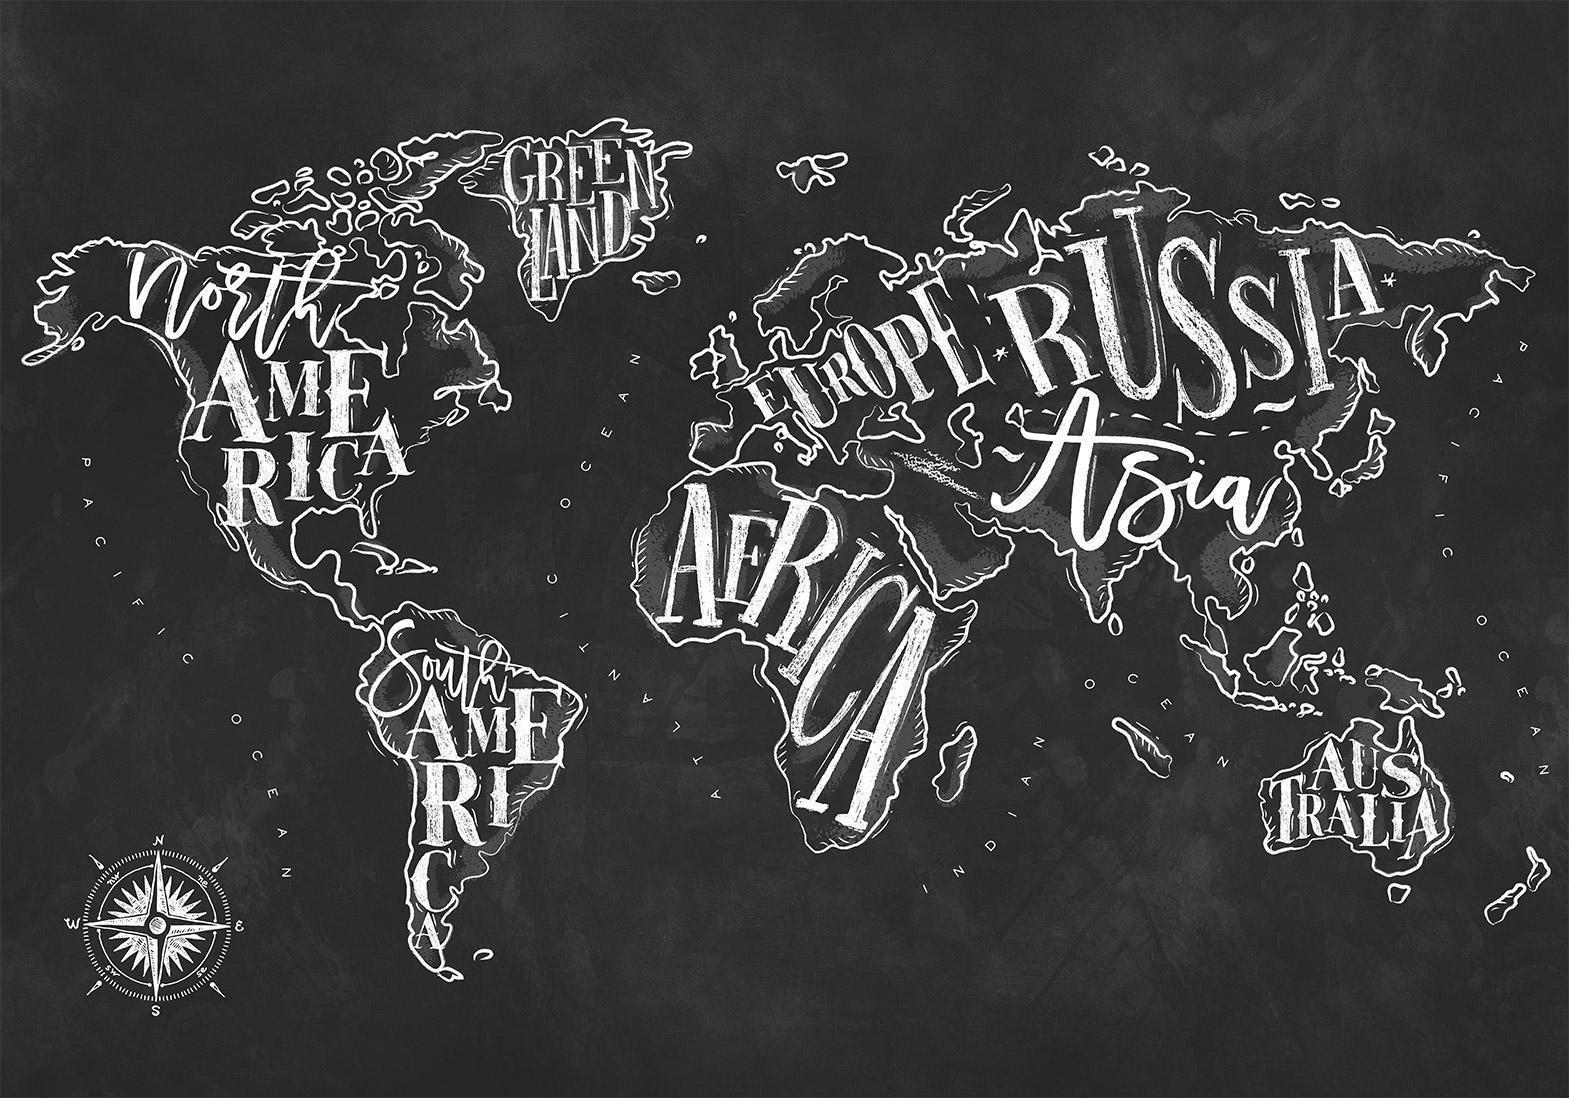 Papier peint - Modern world map - black and white continents with English names